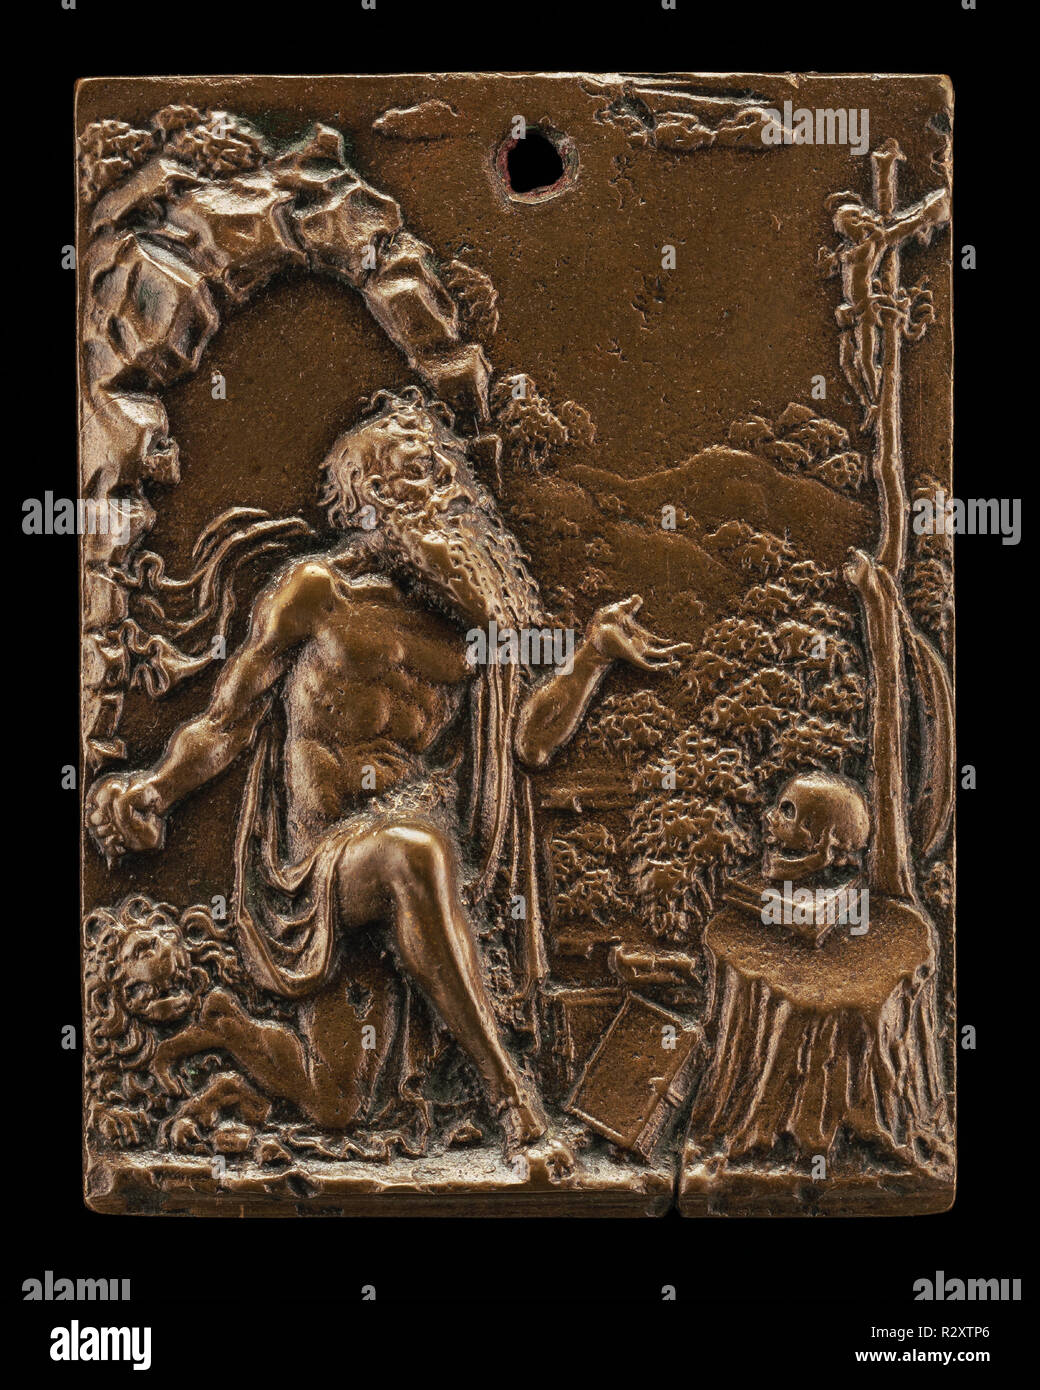 Saint Jerome. Dimensions: overall: 5.7 x 4.4 cm (2 1/4 x 1 3/4 in.) gross weight: 37 gr. Medium: bronze//Light brown patina. Museum: National Gallery of Art, Washington DC. Author: Style of Moderno. Stock Photo